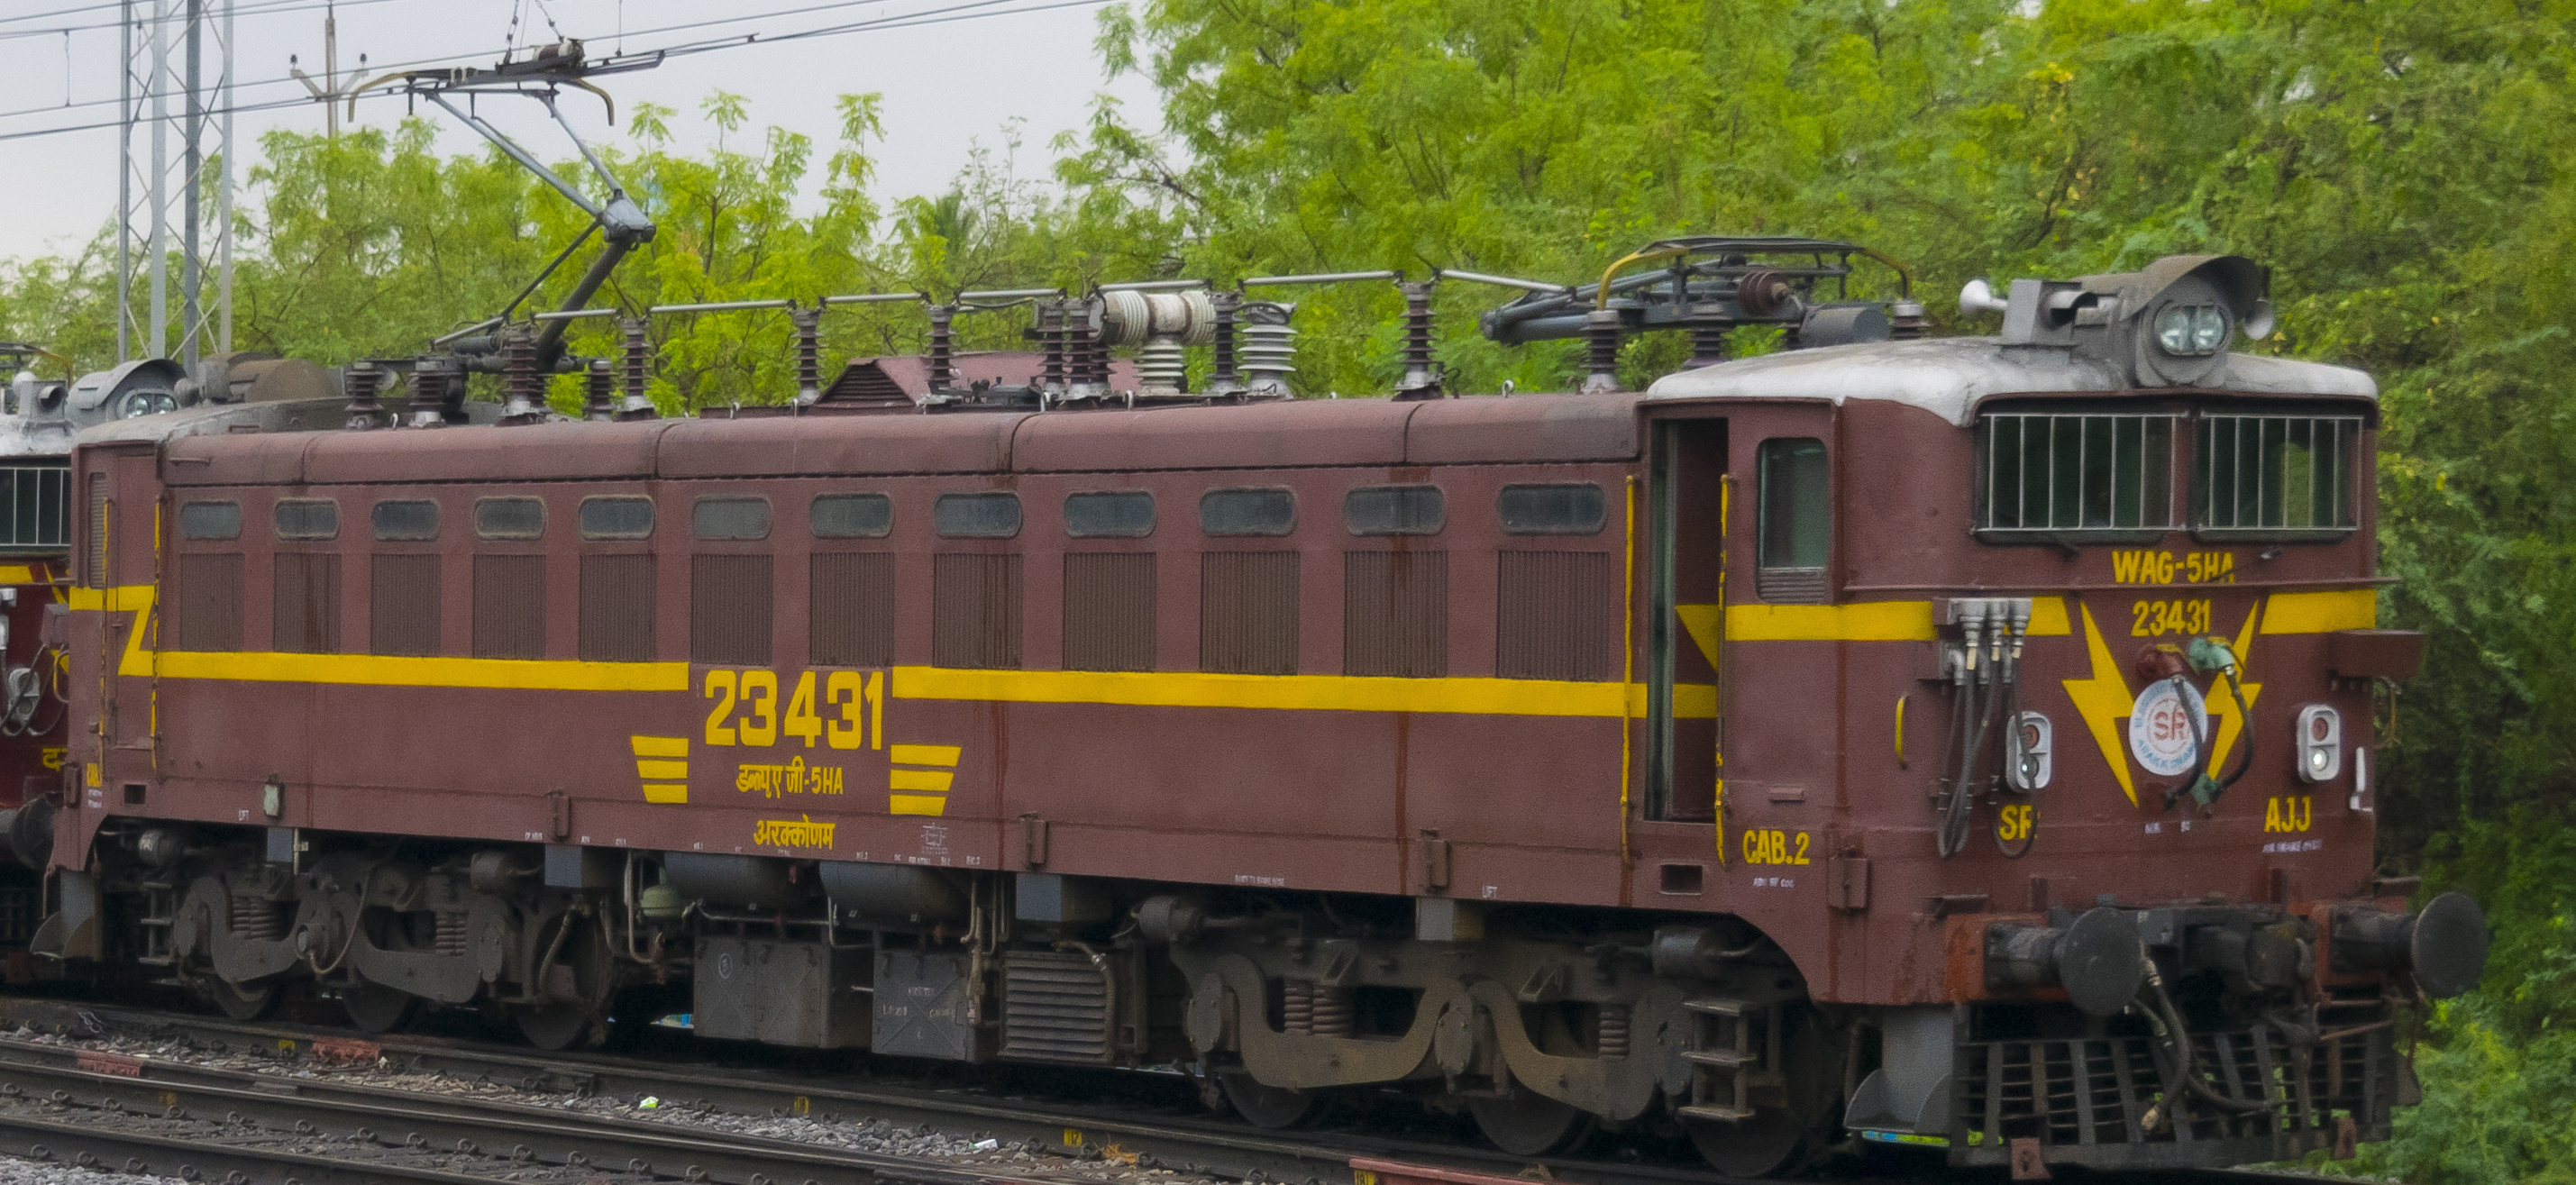 No. 23431 in front of a second WAG-5 in May 2016 near Kazipet Junction station, Telangana